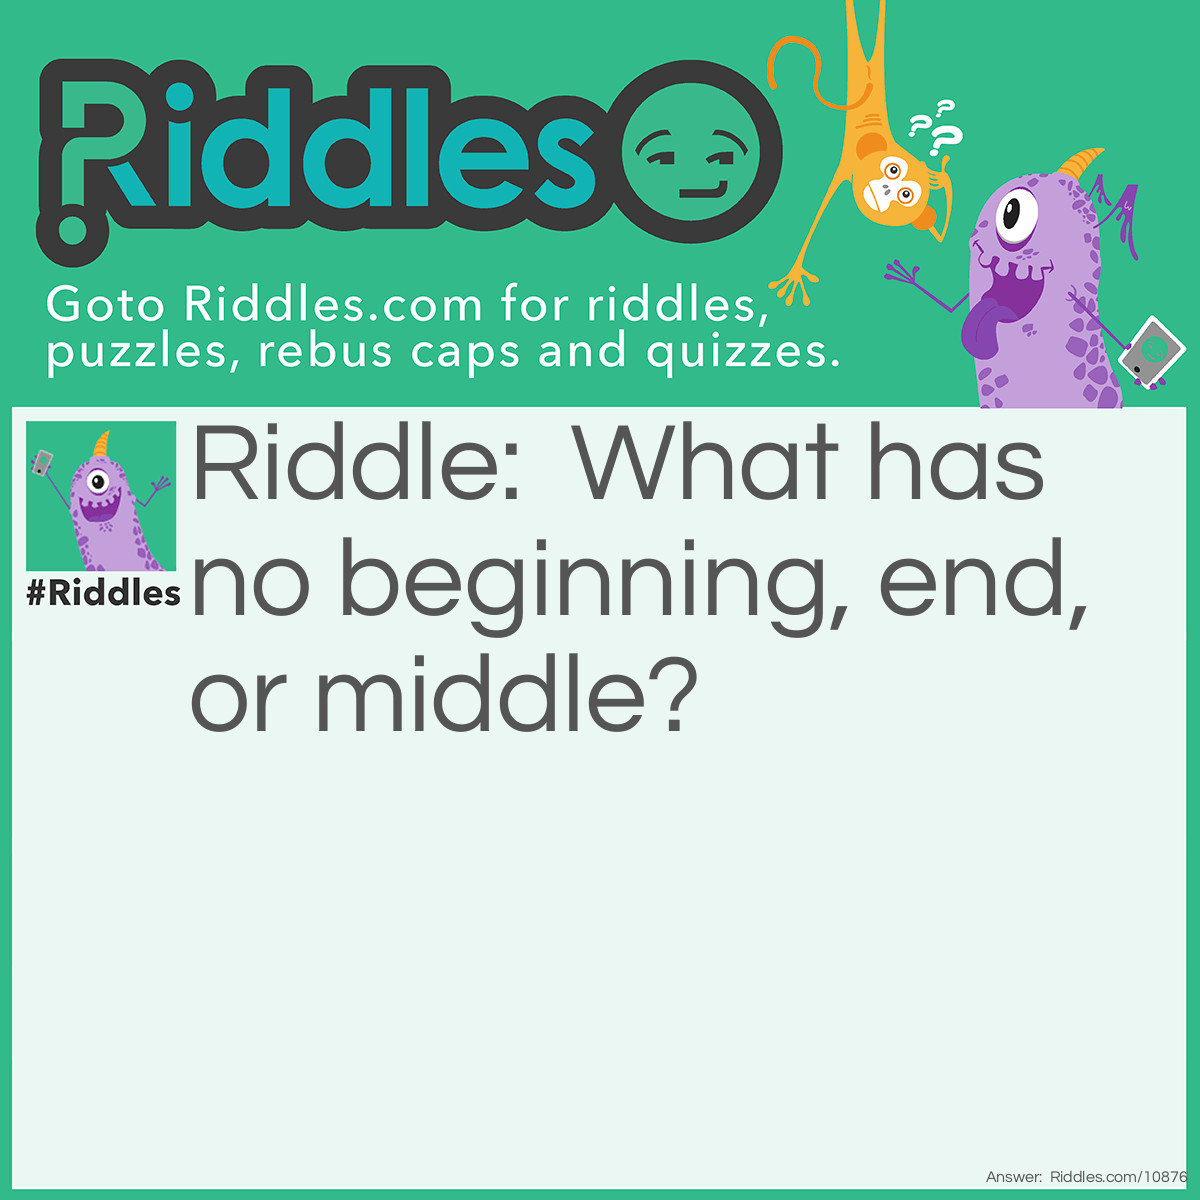 Riddle: What has no beginning, end, or middle? Answer: A donut!